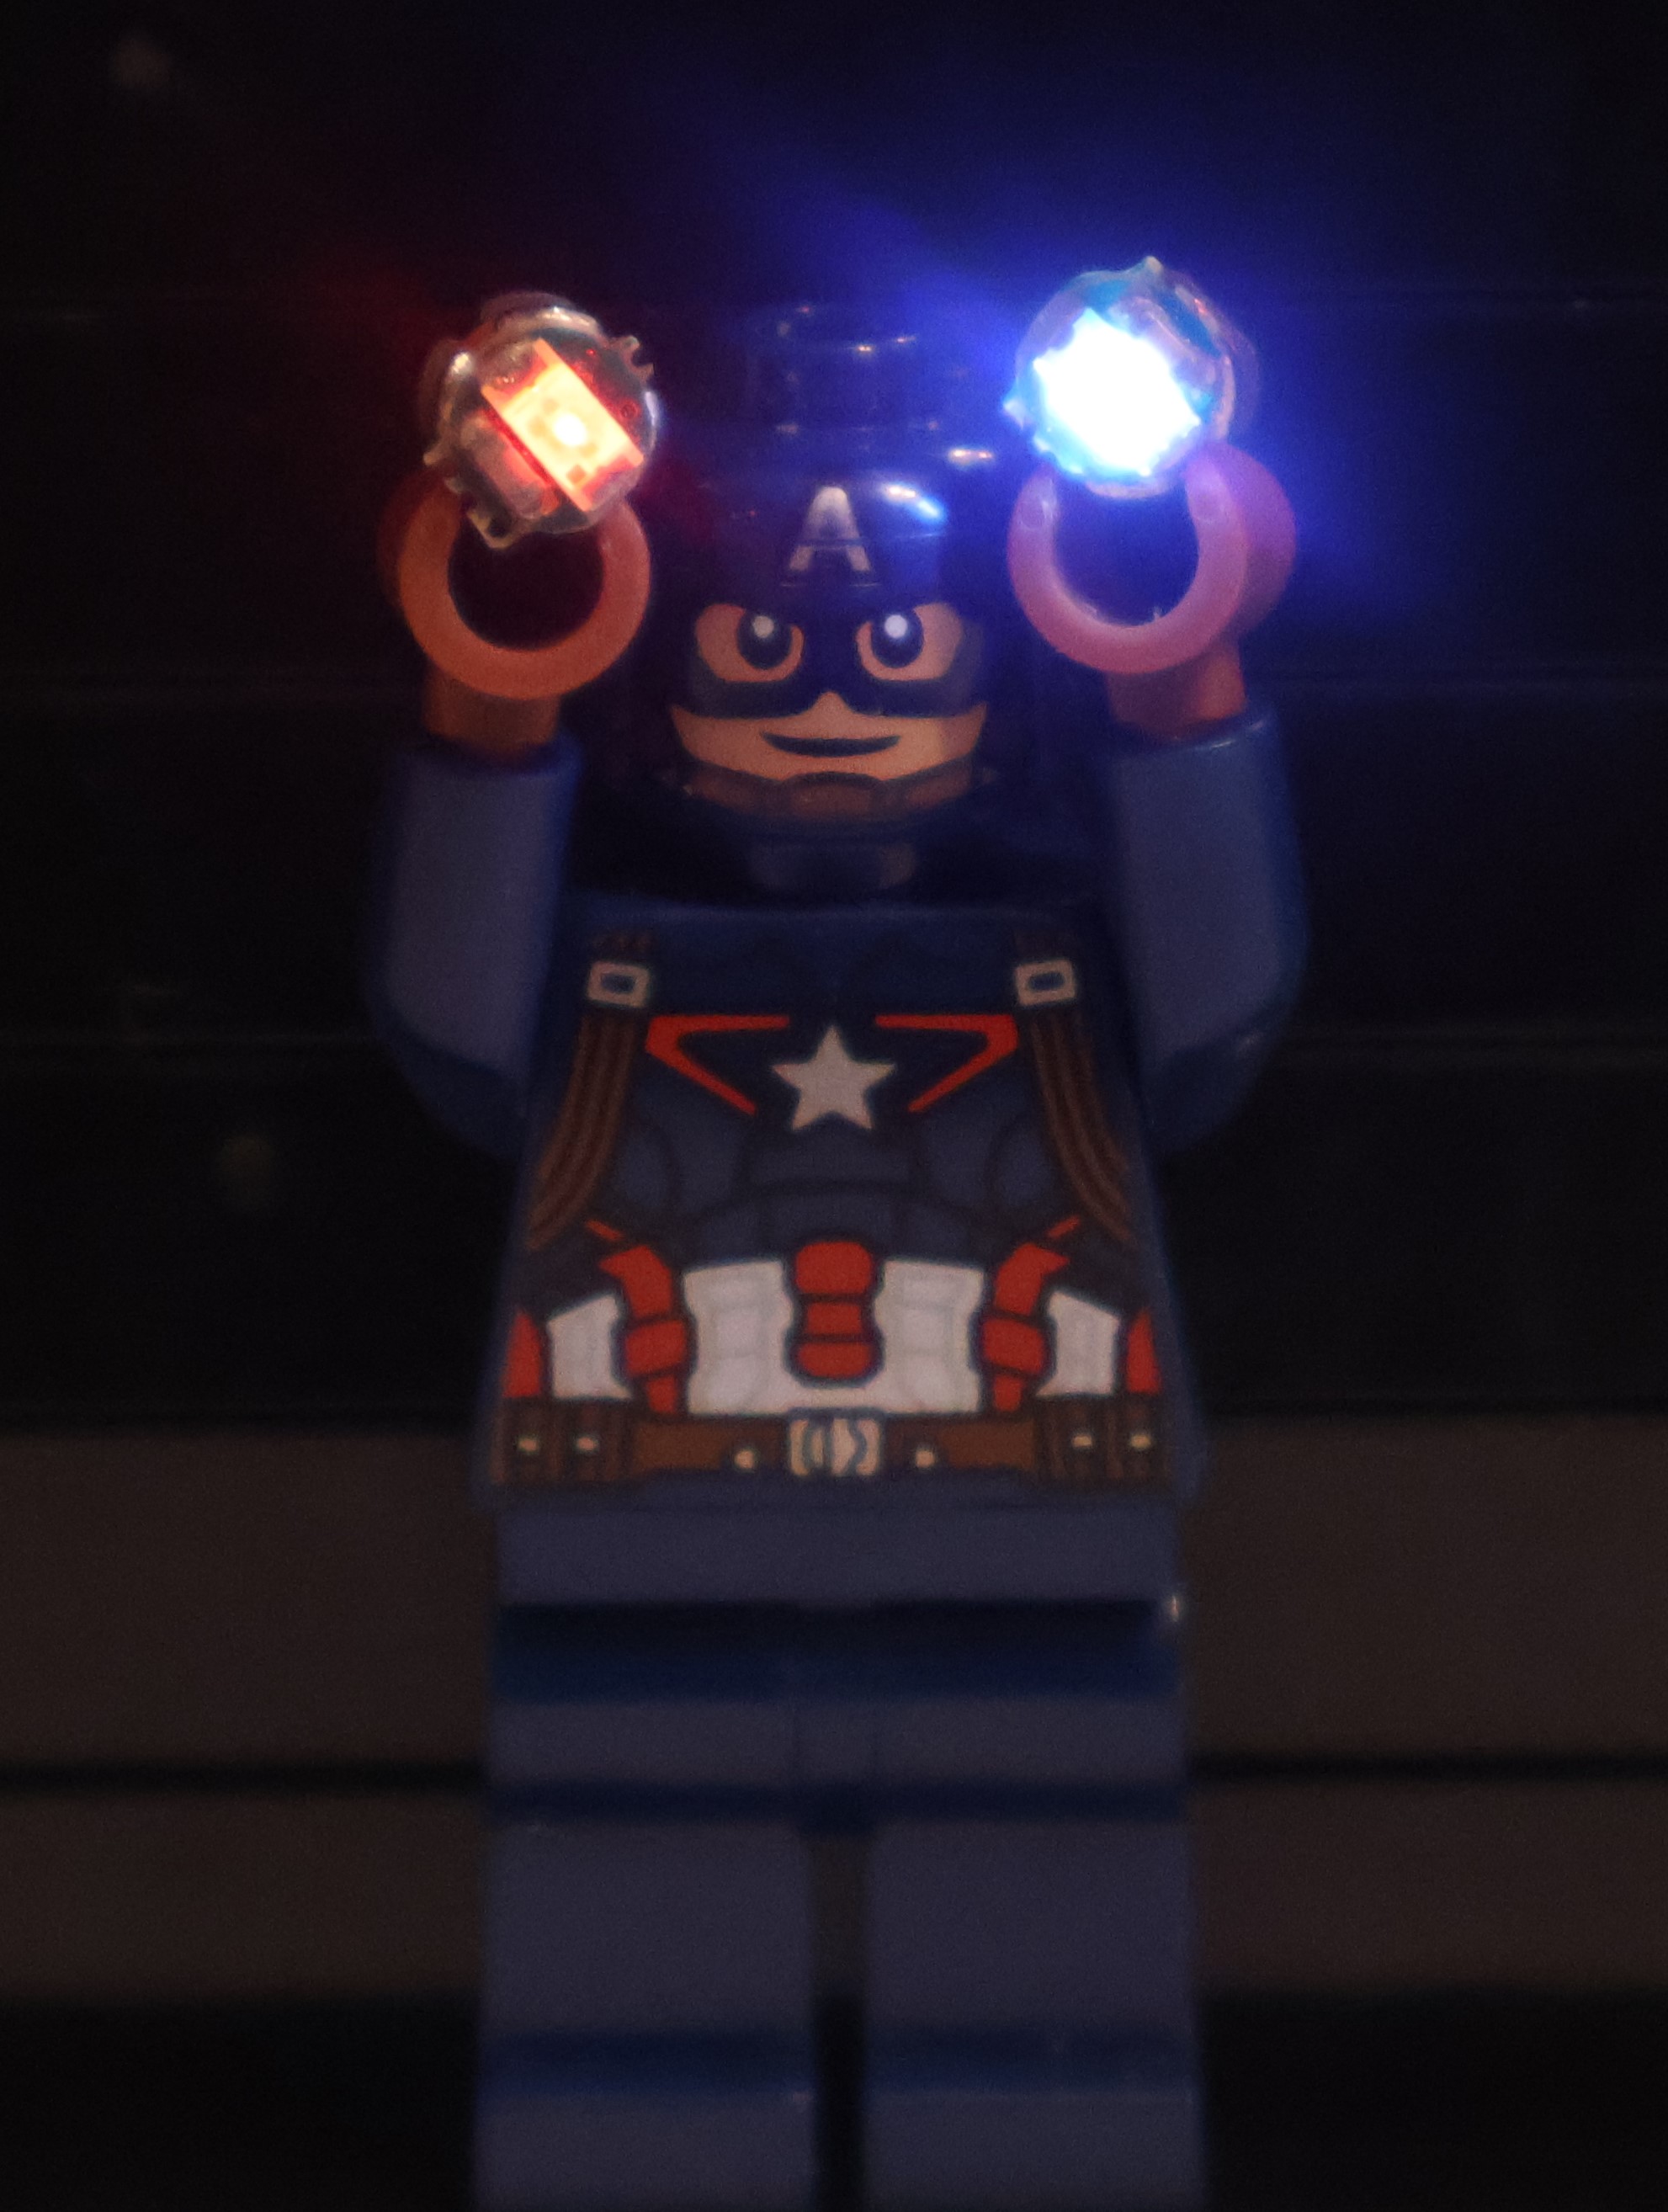 Captain America holds two LEDs